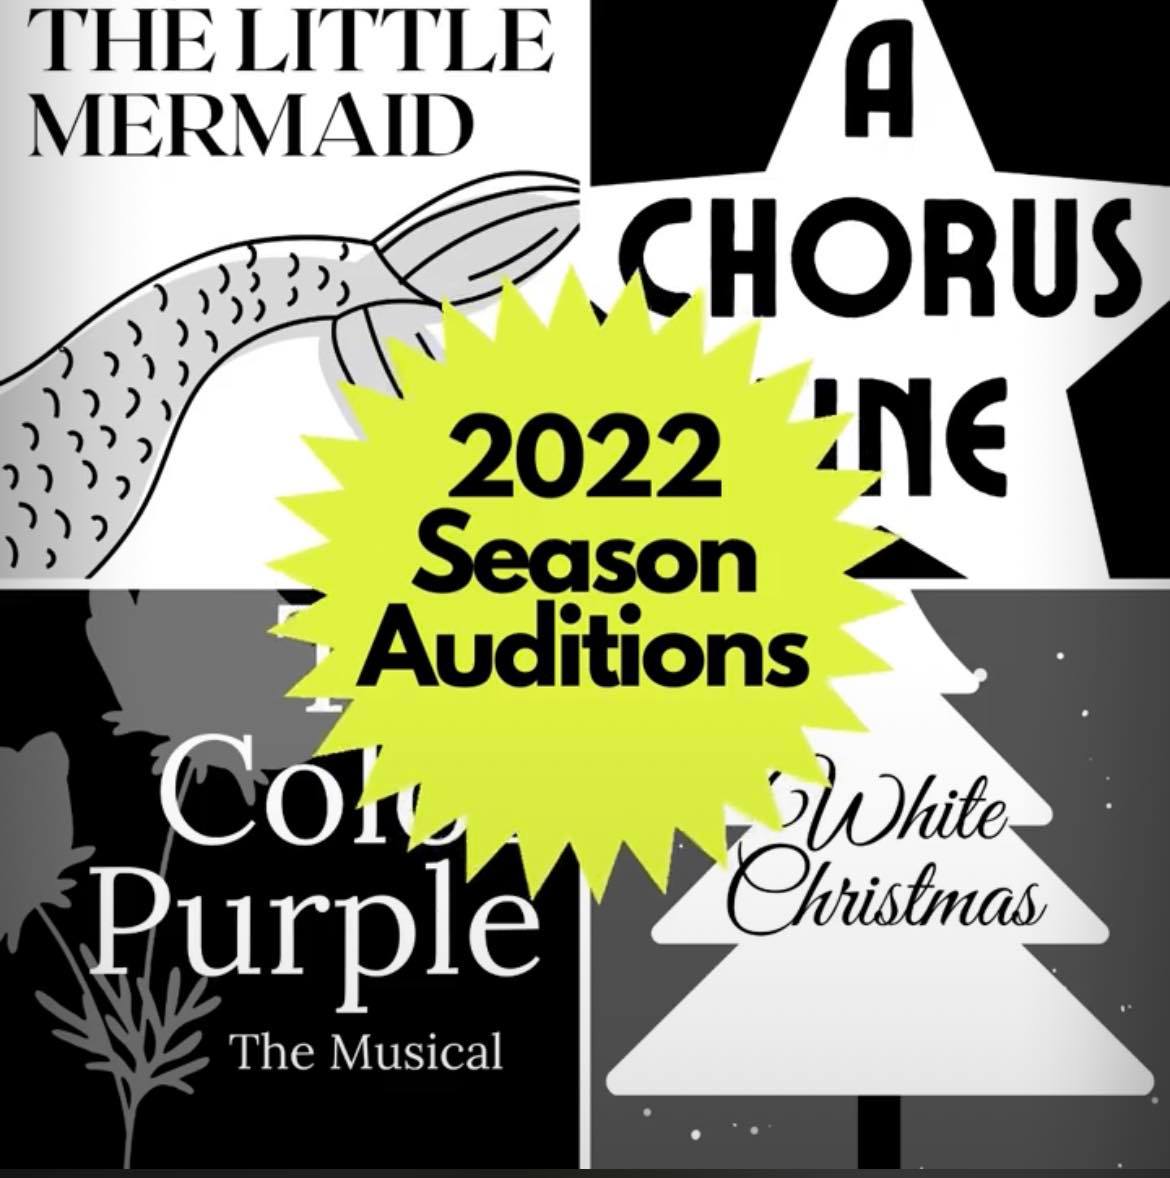 Auditions for upcoming season, by Woodlawn Theatre, San Antonio